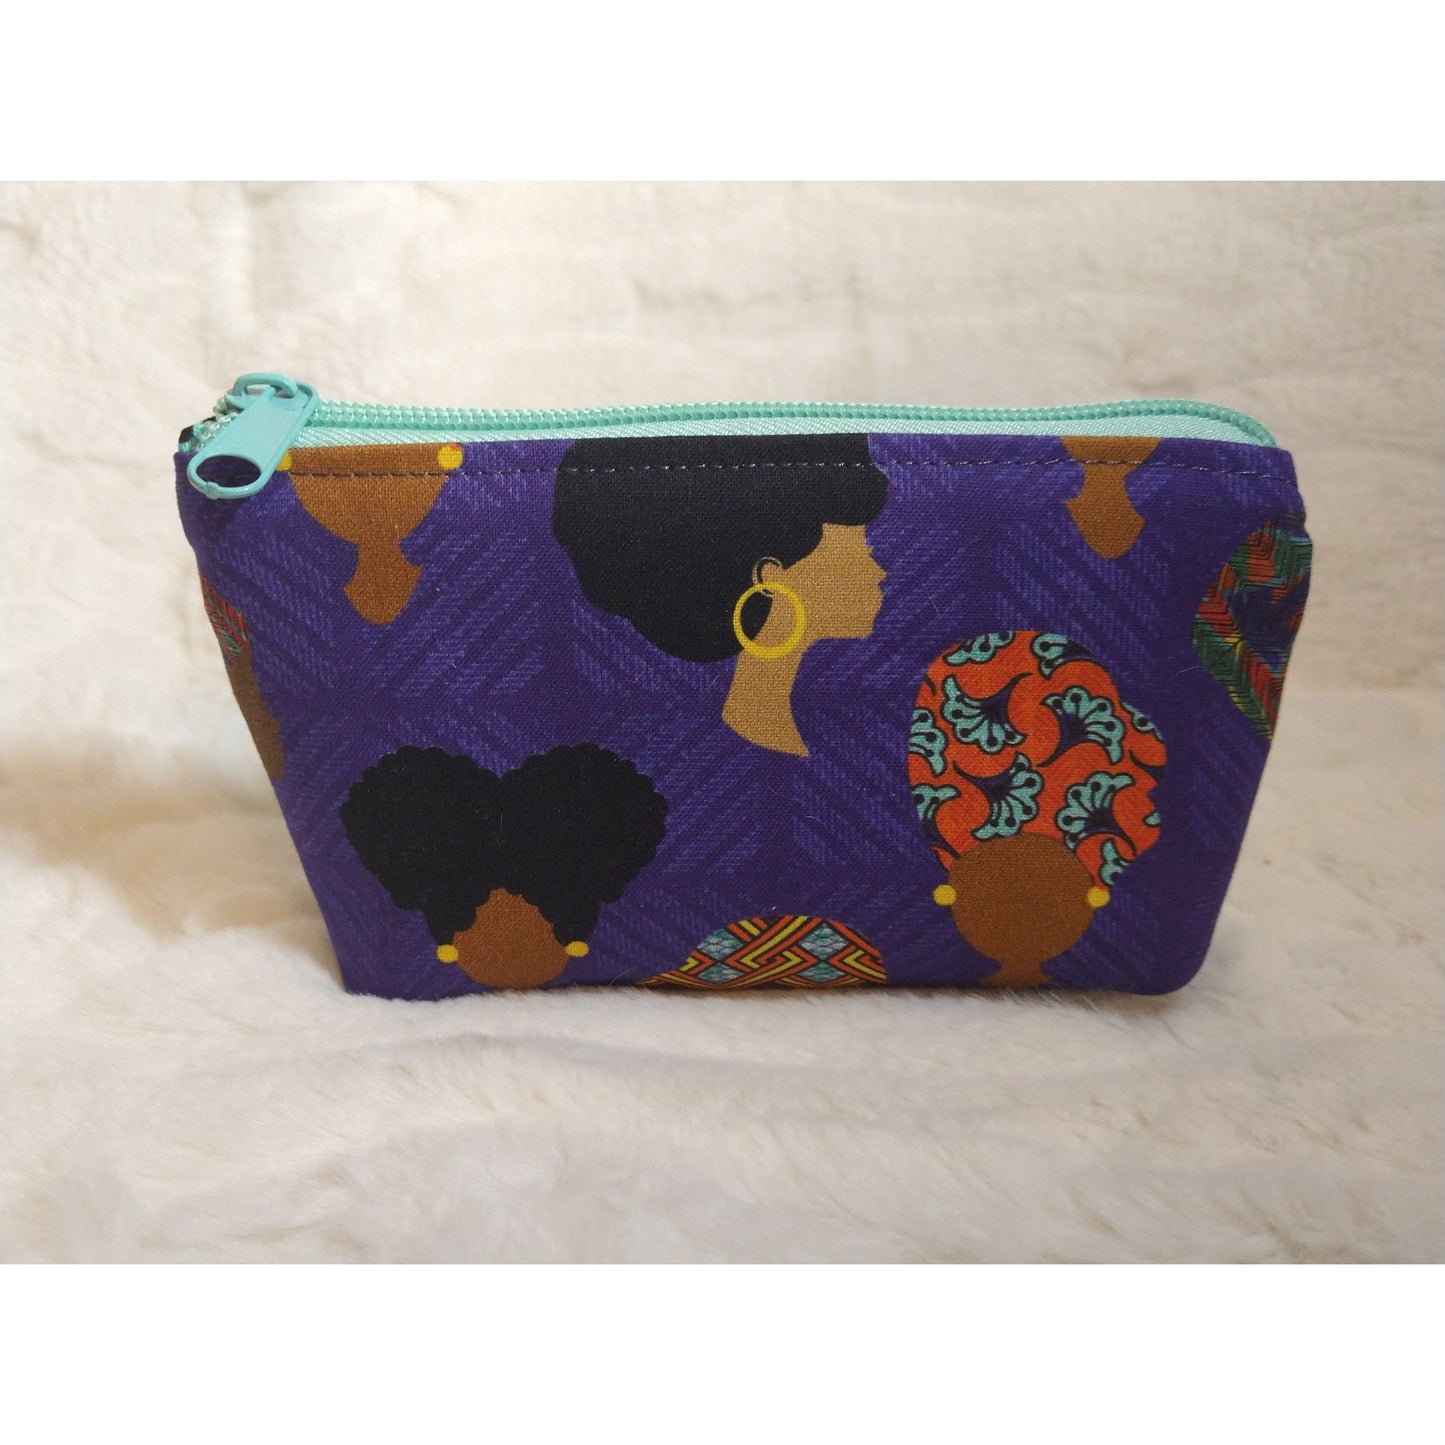 Black Women Small Zipper Pouch (Perfectly Imperfect)